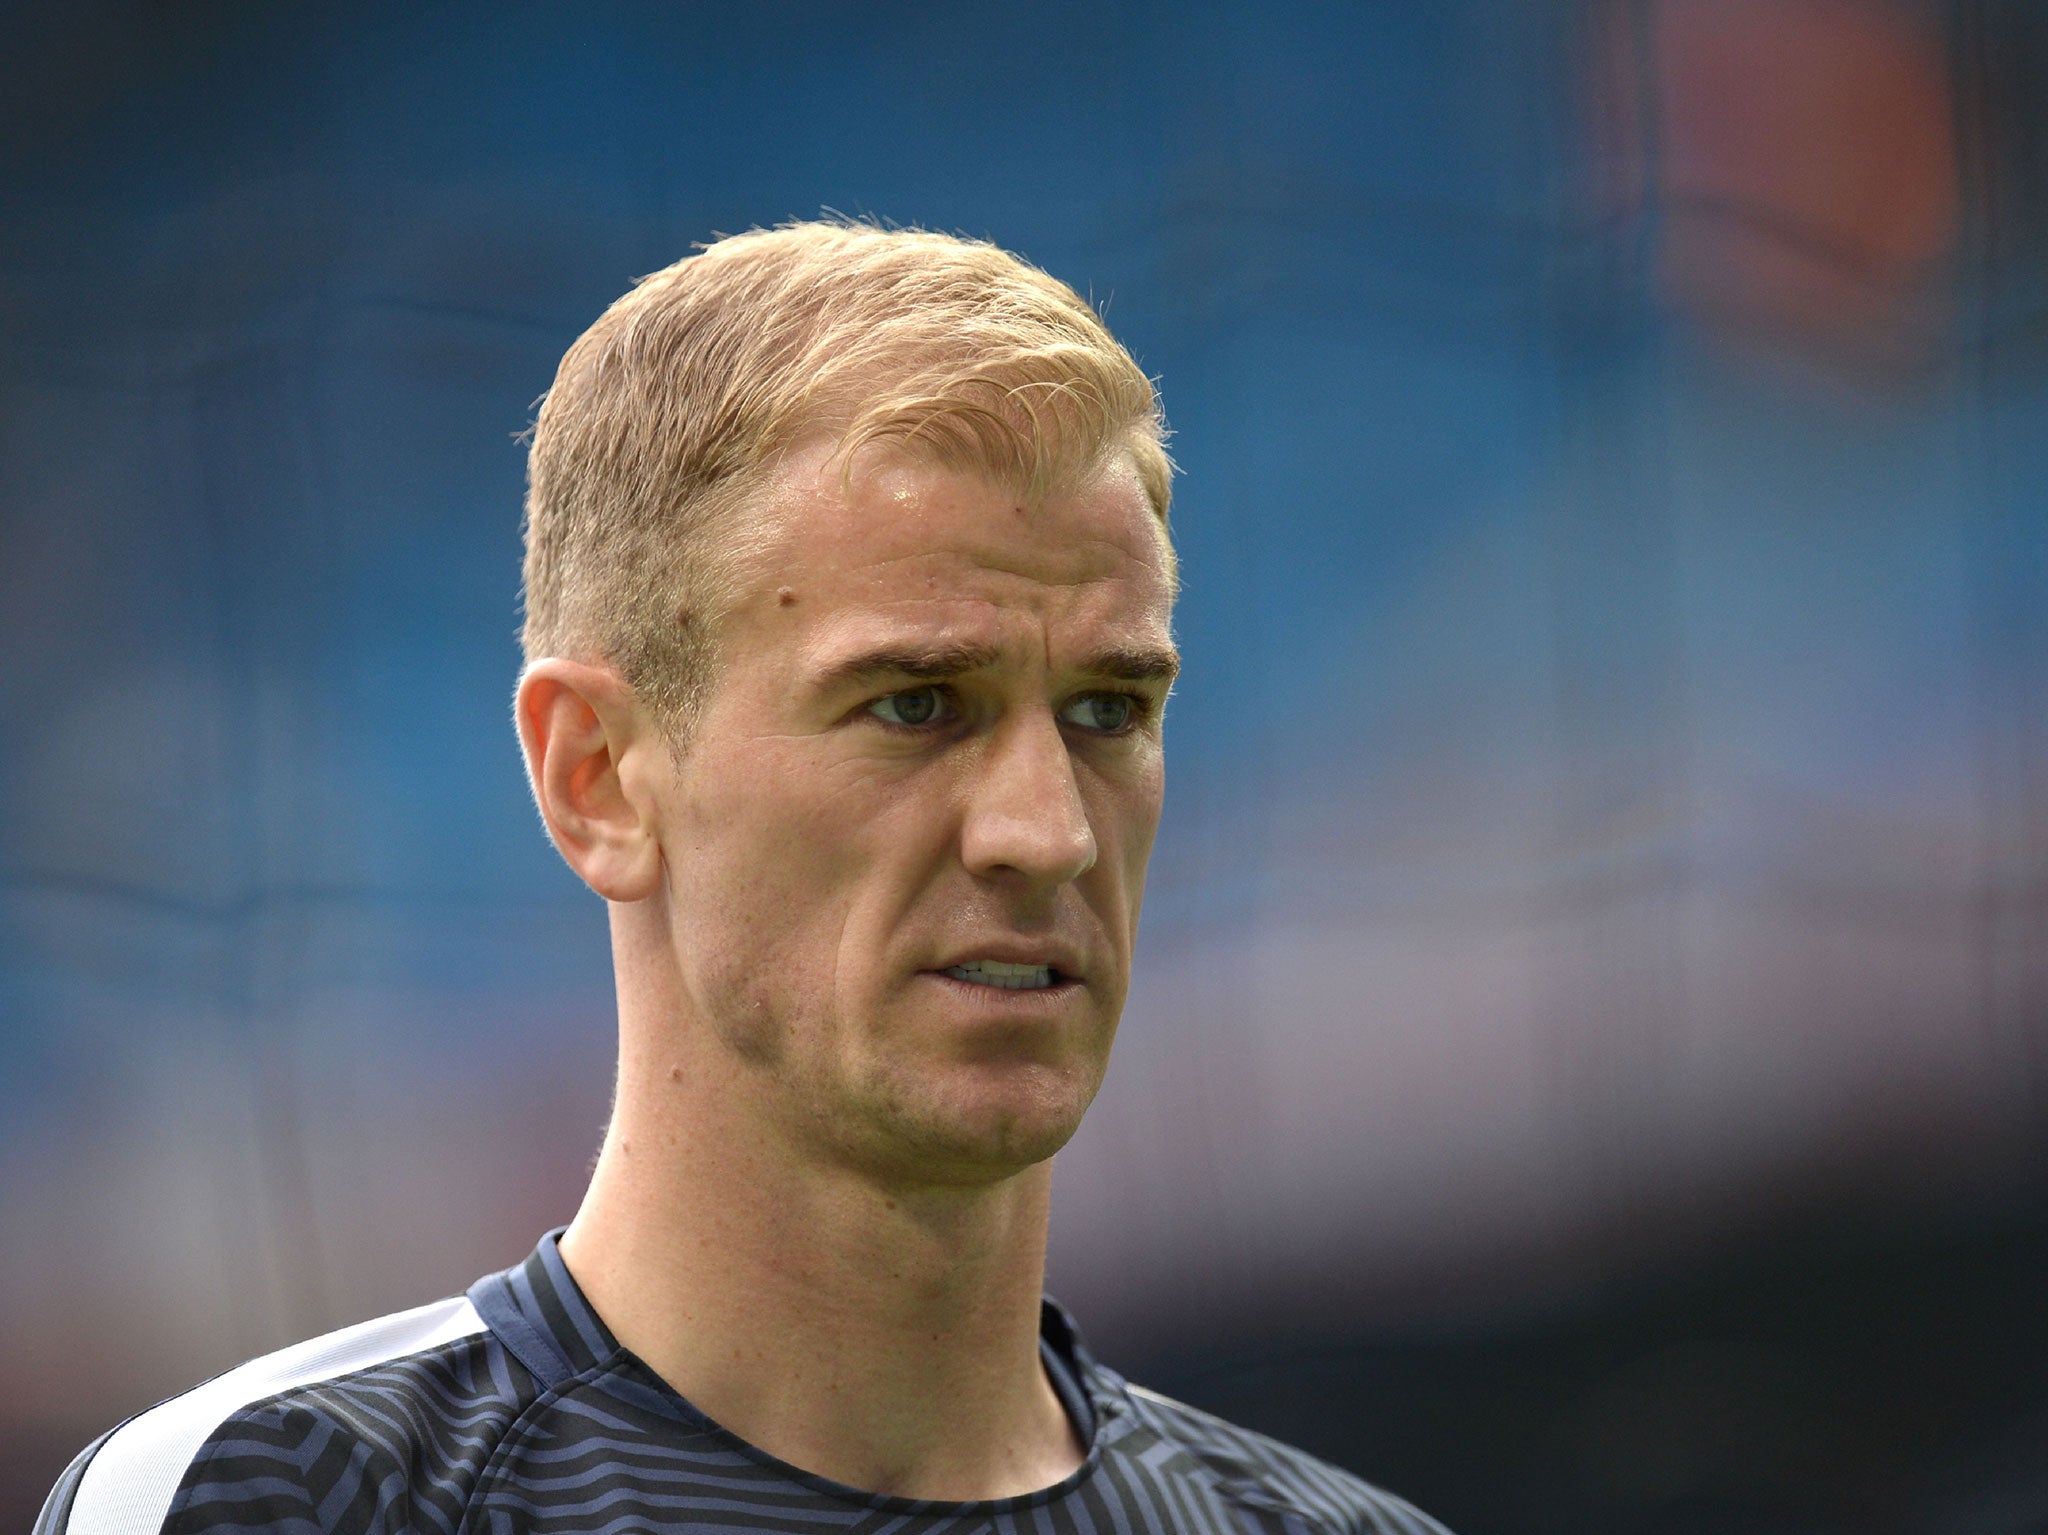 Joe Hart faces a new chapter in his career